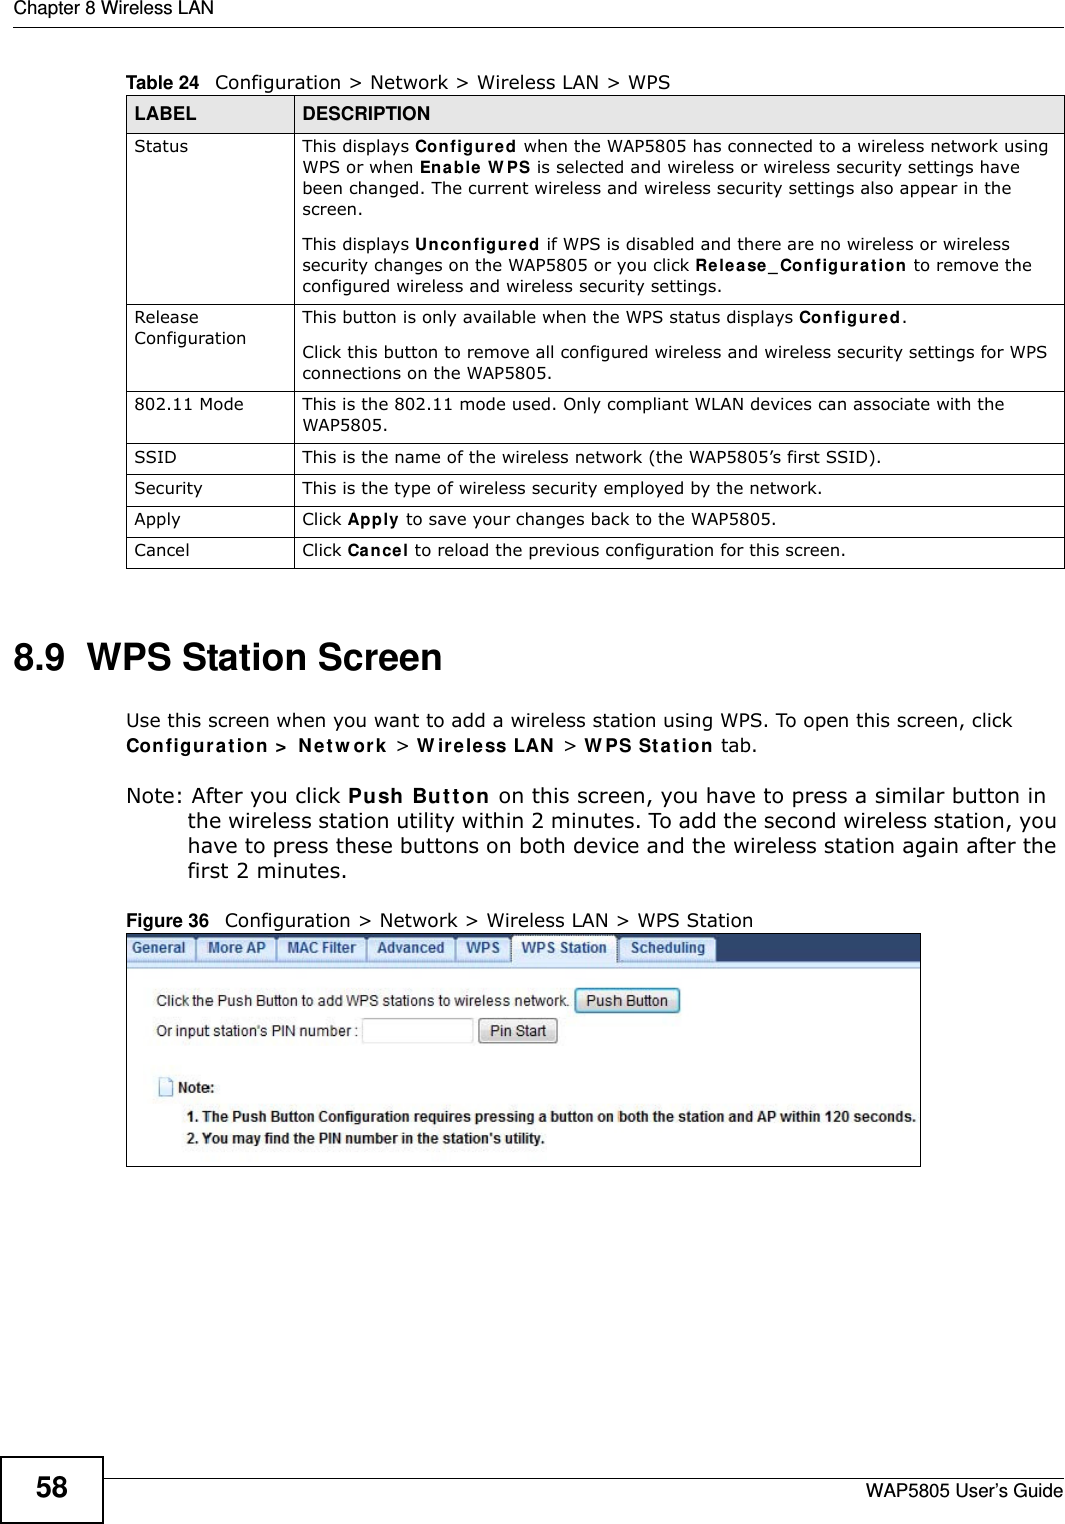 Chapter 8 Wireless LANWAP5805 User’s Guide588.9  WPS Station Screen  Use this screen when you want to add a wireless station using WPS. To open this screen, click Configuration &gt; Network &gt; Wireless LAN &gt; WPS Station tab.Note: After you click Push Button on this screen, you have to press a similar button in the wireless station utility within 2 minutes. To add the second wireless station, you have to press these buttons on both device and the wireless station again after the first 2 minutes.Figure 36   Configuration &gt; Network &gt; Wireless LAN &gt; WPS StationStatus This displays Configured when the WAP5805 has connected to a wireless network using WPS or when Enable WPS is selected and wireless or wireless security settings have been changed. The current wireless and wireless security settings also appear in the screen.This displays Unconfigured if WPS is disabled and there are no wireless or wireless security changes on the WAP5805 or you click Release_Configuration to remove the configured wireless and wireless security settings.Release ConfigurationThis button is only available when the WPS status displays Configured.Click this button to remove all configured wireless and wireless security settings for WPS connections on the WAP5805.802.11 Mode This is the 802.11 mode used. Only compliant WLAN devices can associate with the WAP5805.SSID This is the name of the wireless network (the WAP5805’s first SSID).Security This is the type of wireless security employed by the network.Apply Click Apply to save your changes back to the WAP5805.Cancel Click Cancel to reload the previous configuration for this screen.Table 24   Configuration &gt; Network &gt; Wireless LAN &gt; WPSLABEL DESCRIPTION